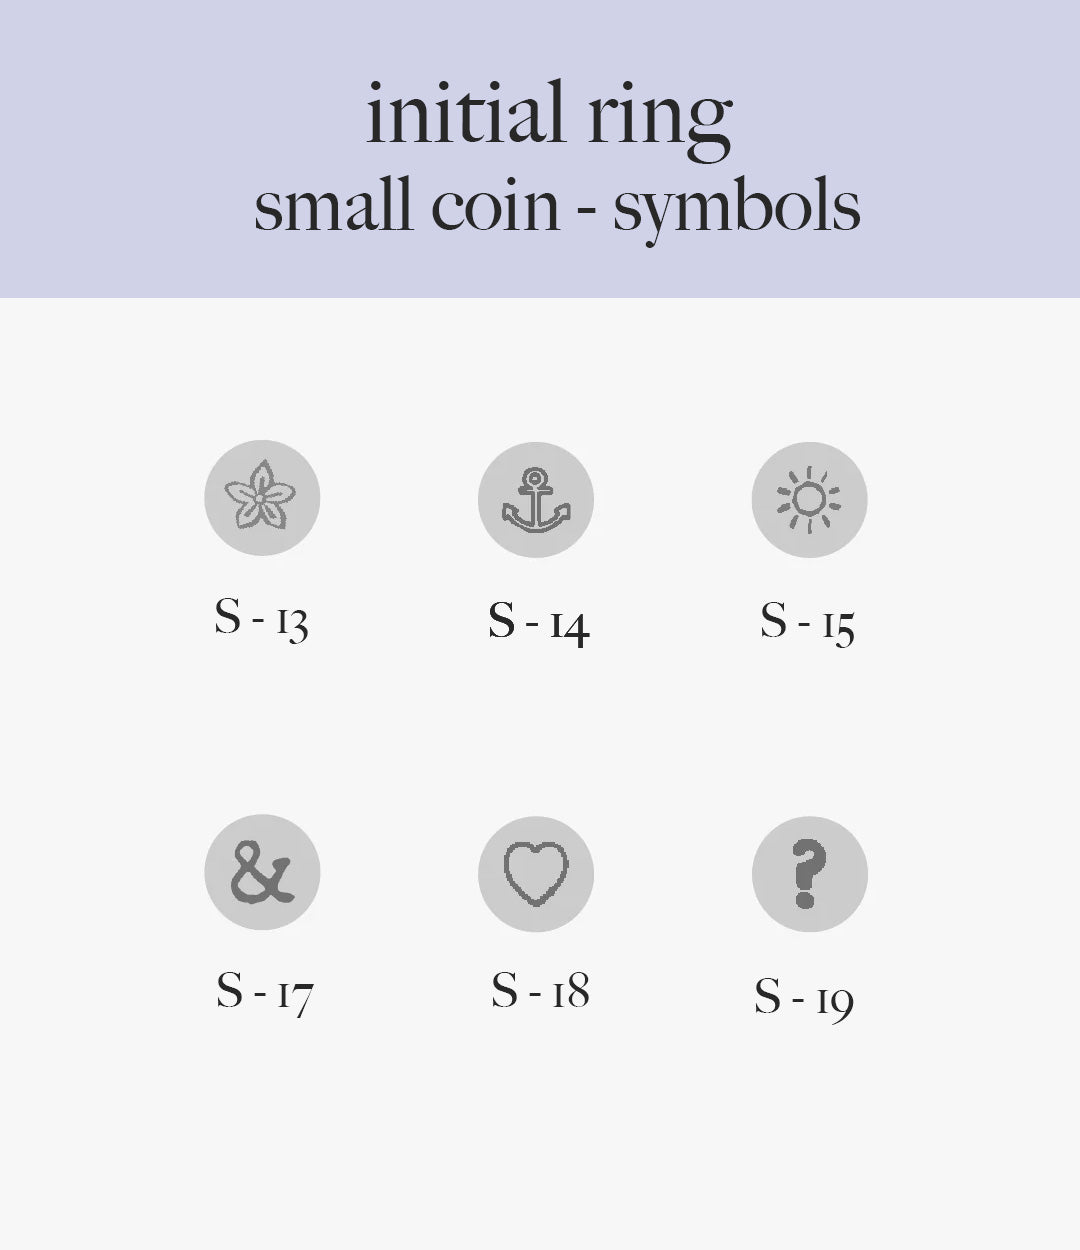 Initial ring gold filled